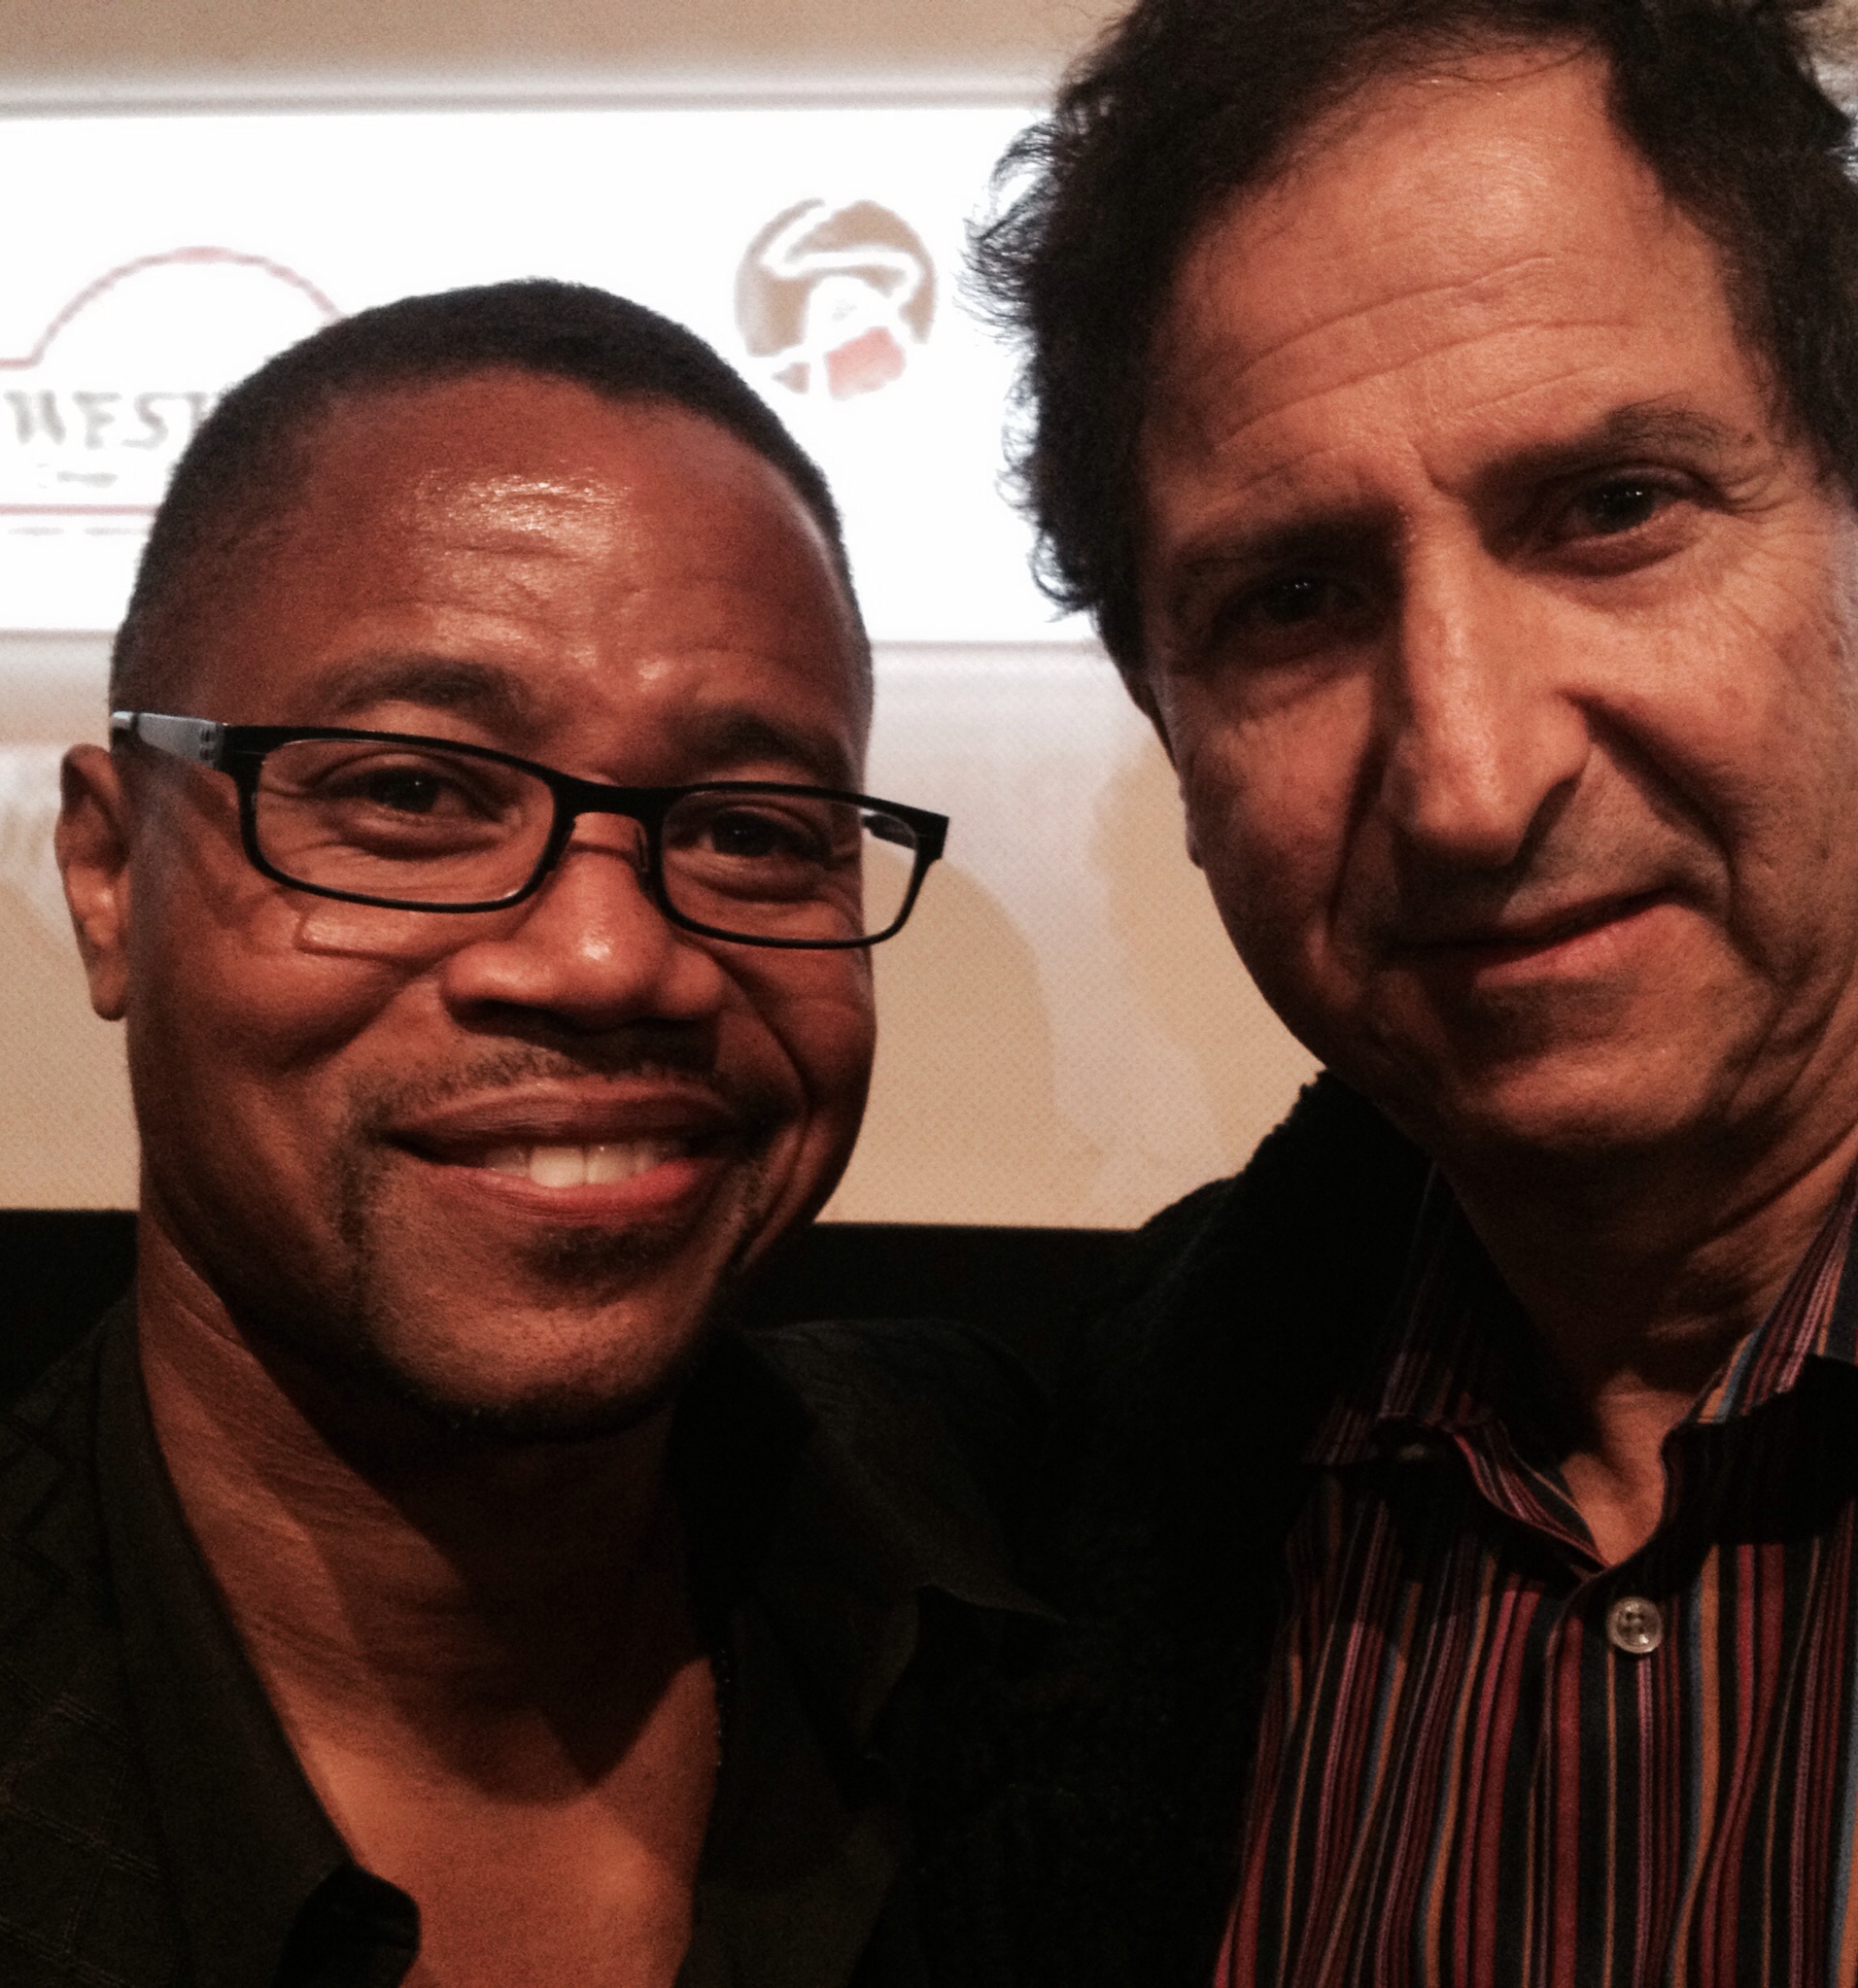 Life Of A King Screening and Award Ceremony for Cuba Gooding Jr(left) at Big Apple Film Festival 2013. Claudio Laniado(right)